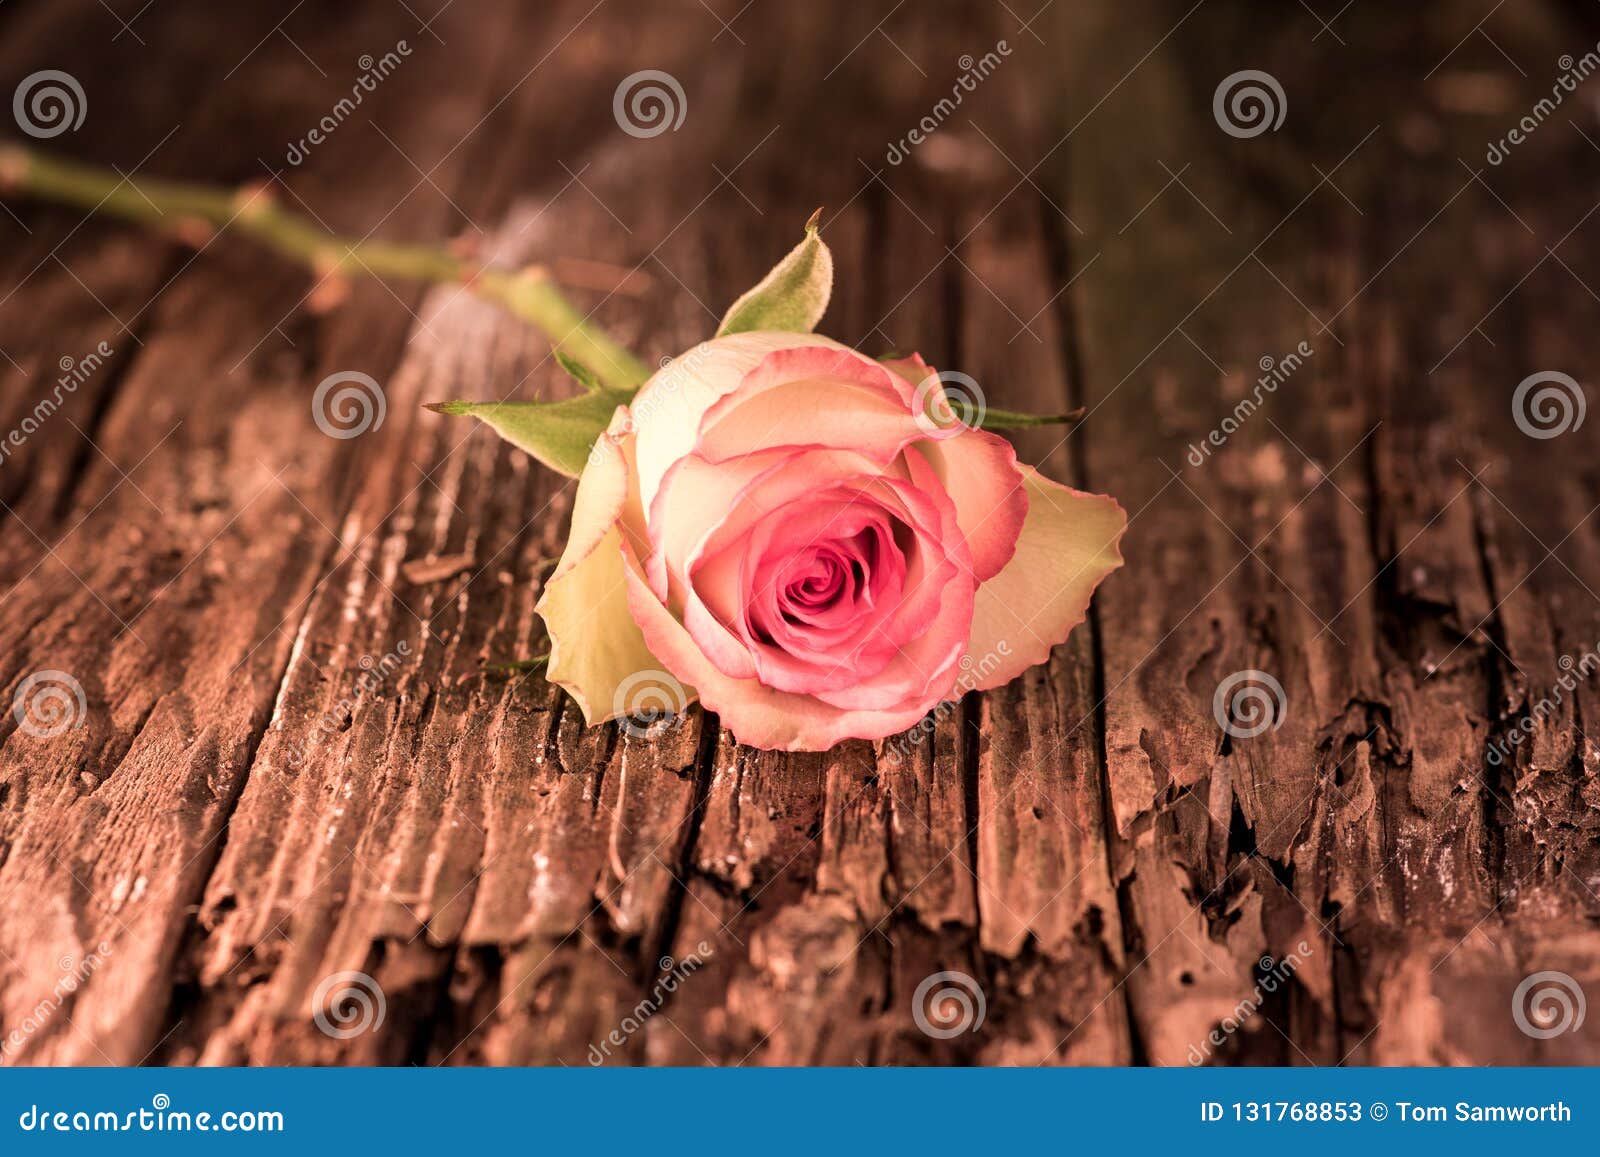 pink frosted white rose on antique wood